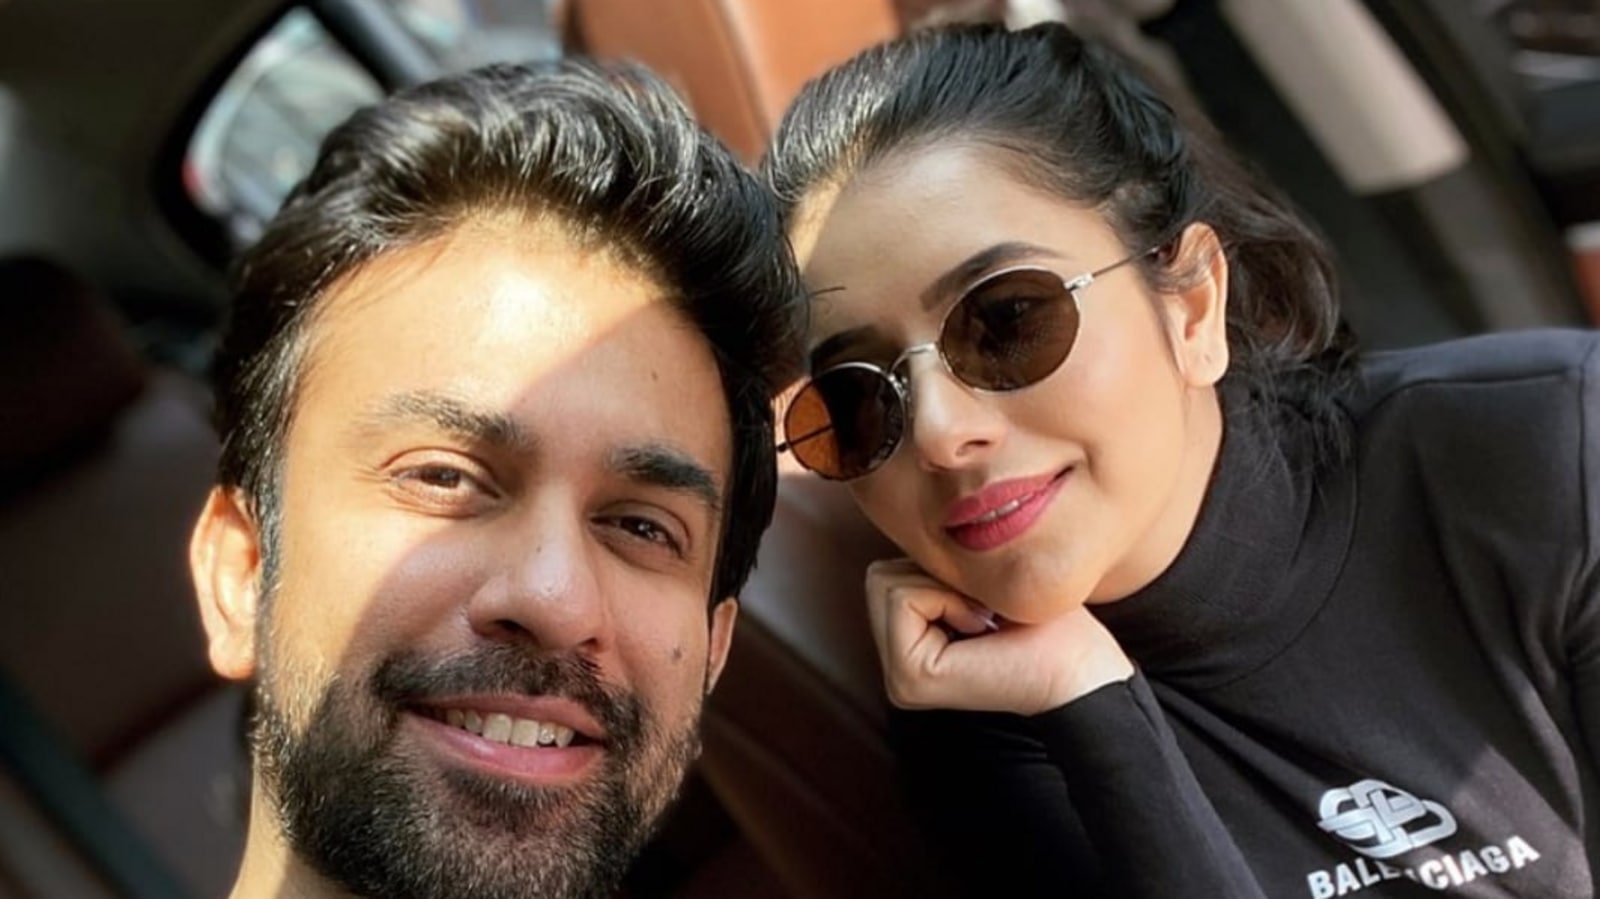 Charu Asopa reacts to Rajeev Sen’s comment about her playing the ‘victim card’: ‘Everything will be unfolded soon’